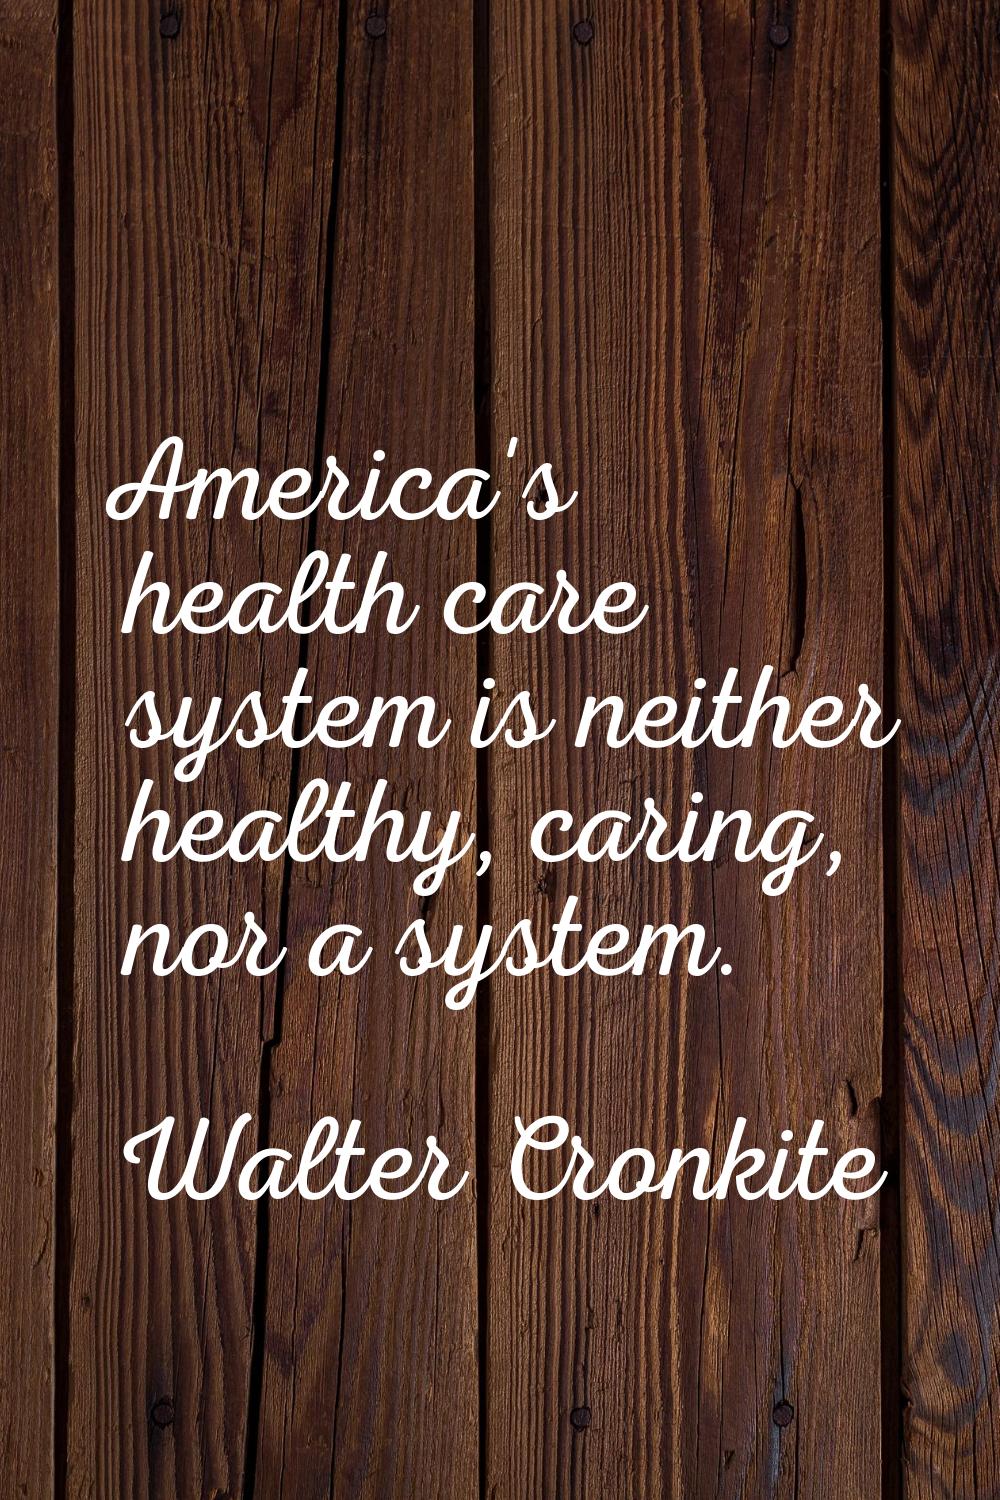 America's health care system is neither healthy, caring, nor a system.